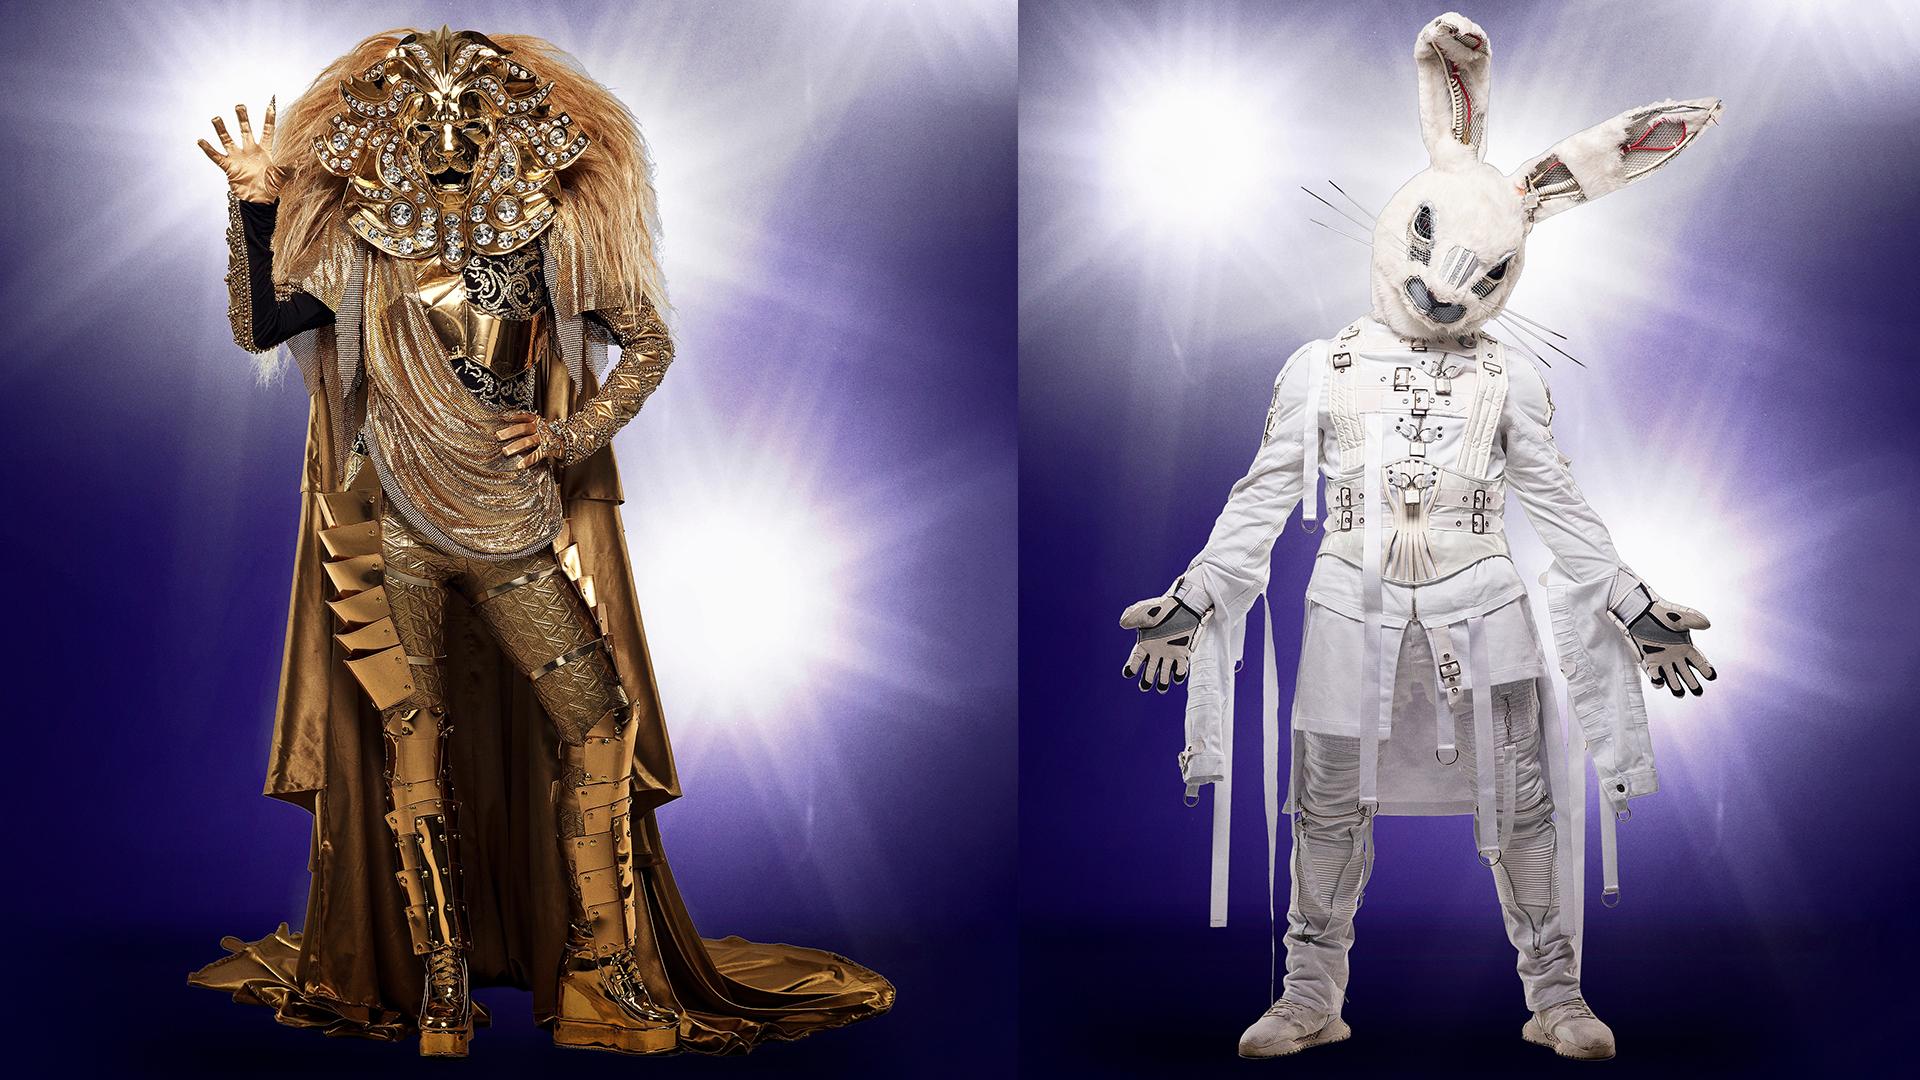 Flipboard: 'The Masked Singer' Unmasks Lion And Rabbit In Double